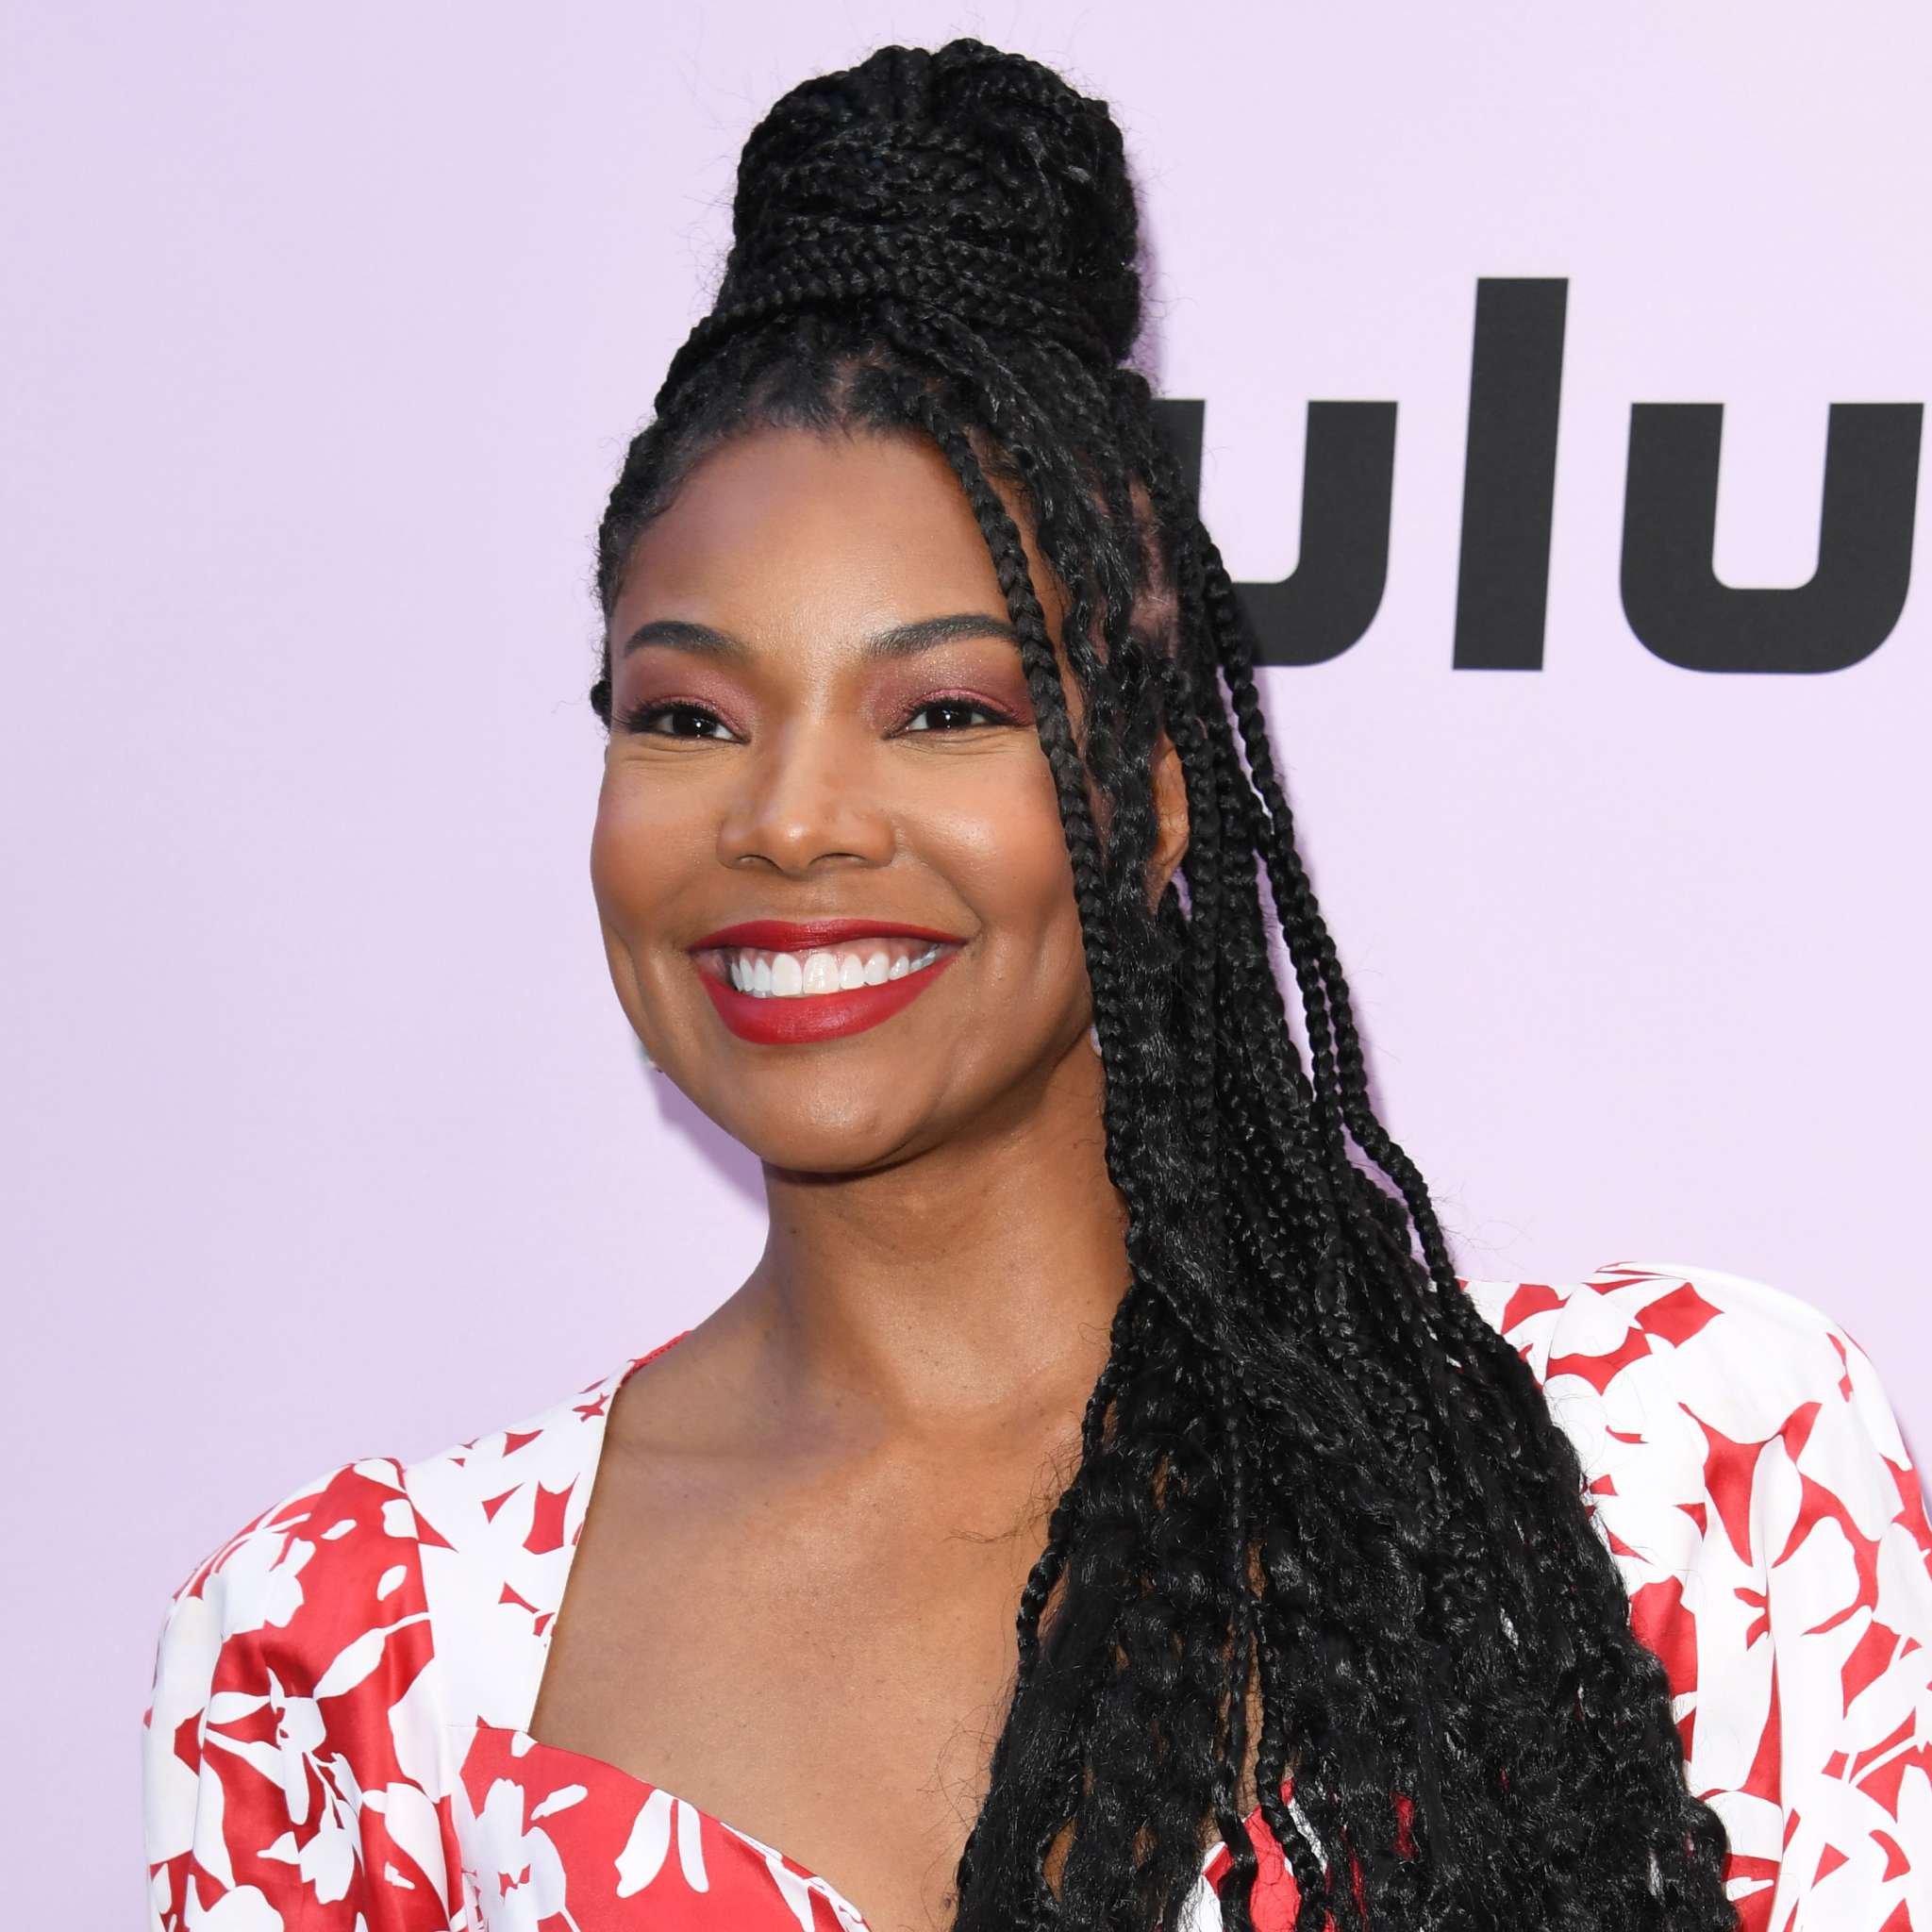 gabrielle-union-celebrates-the-birthday-of-her-bff-and-fans-are-impressed-by-her-emotional-message